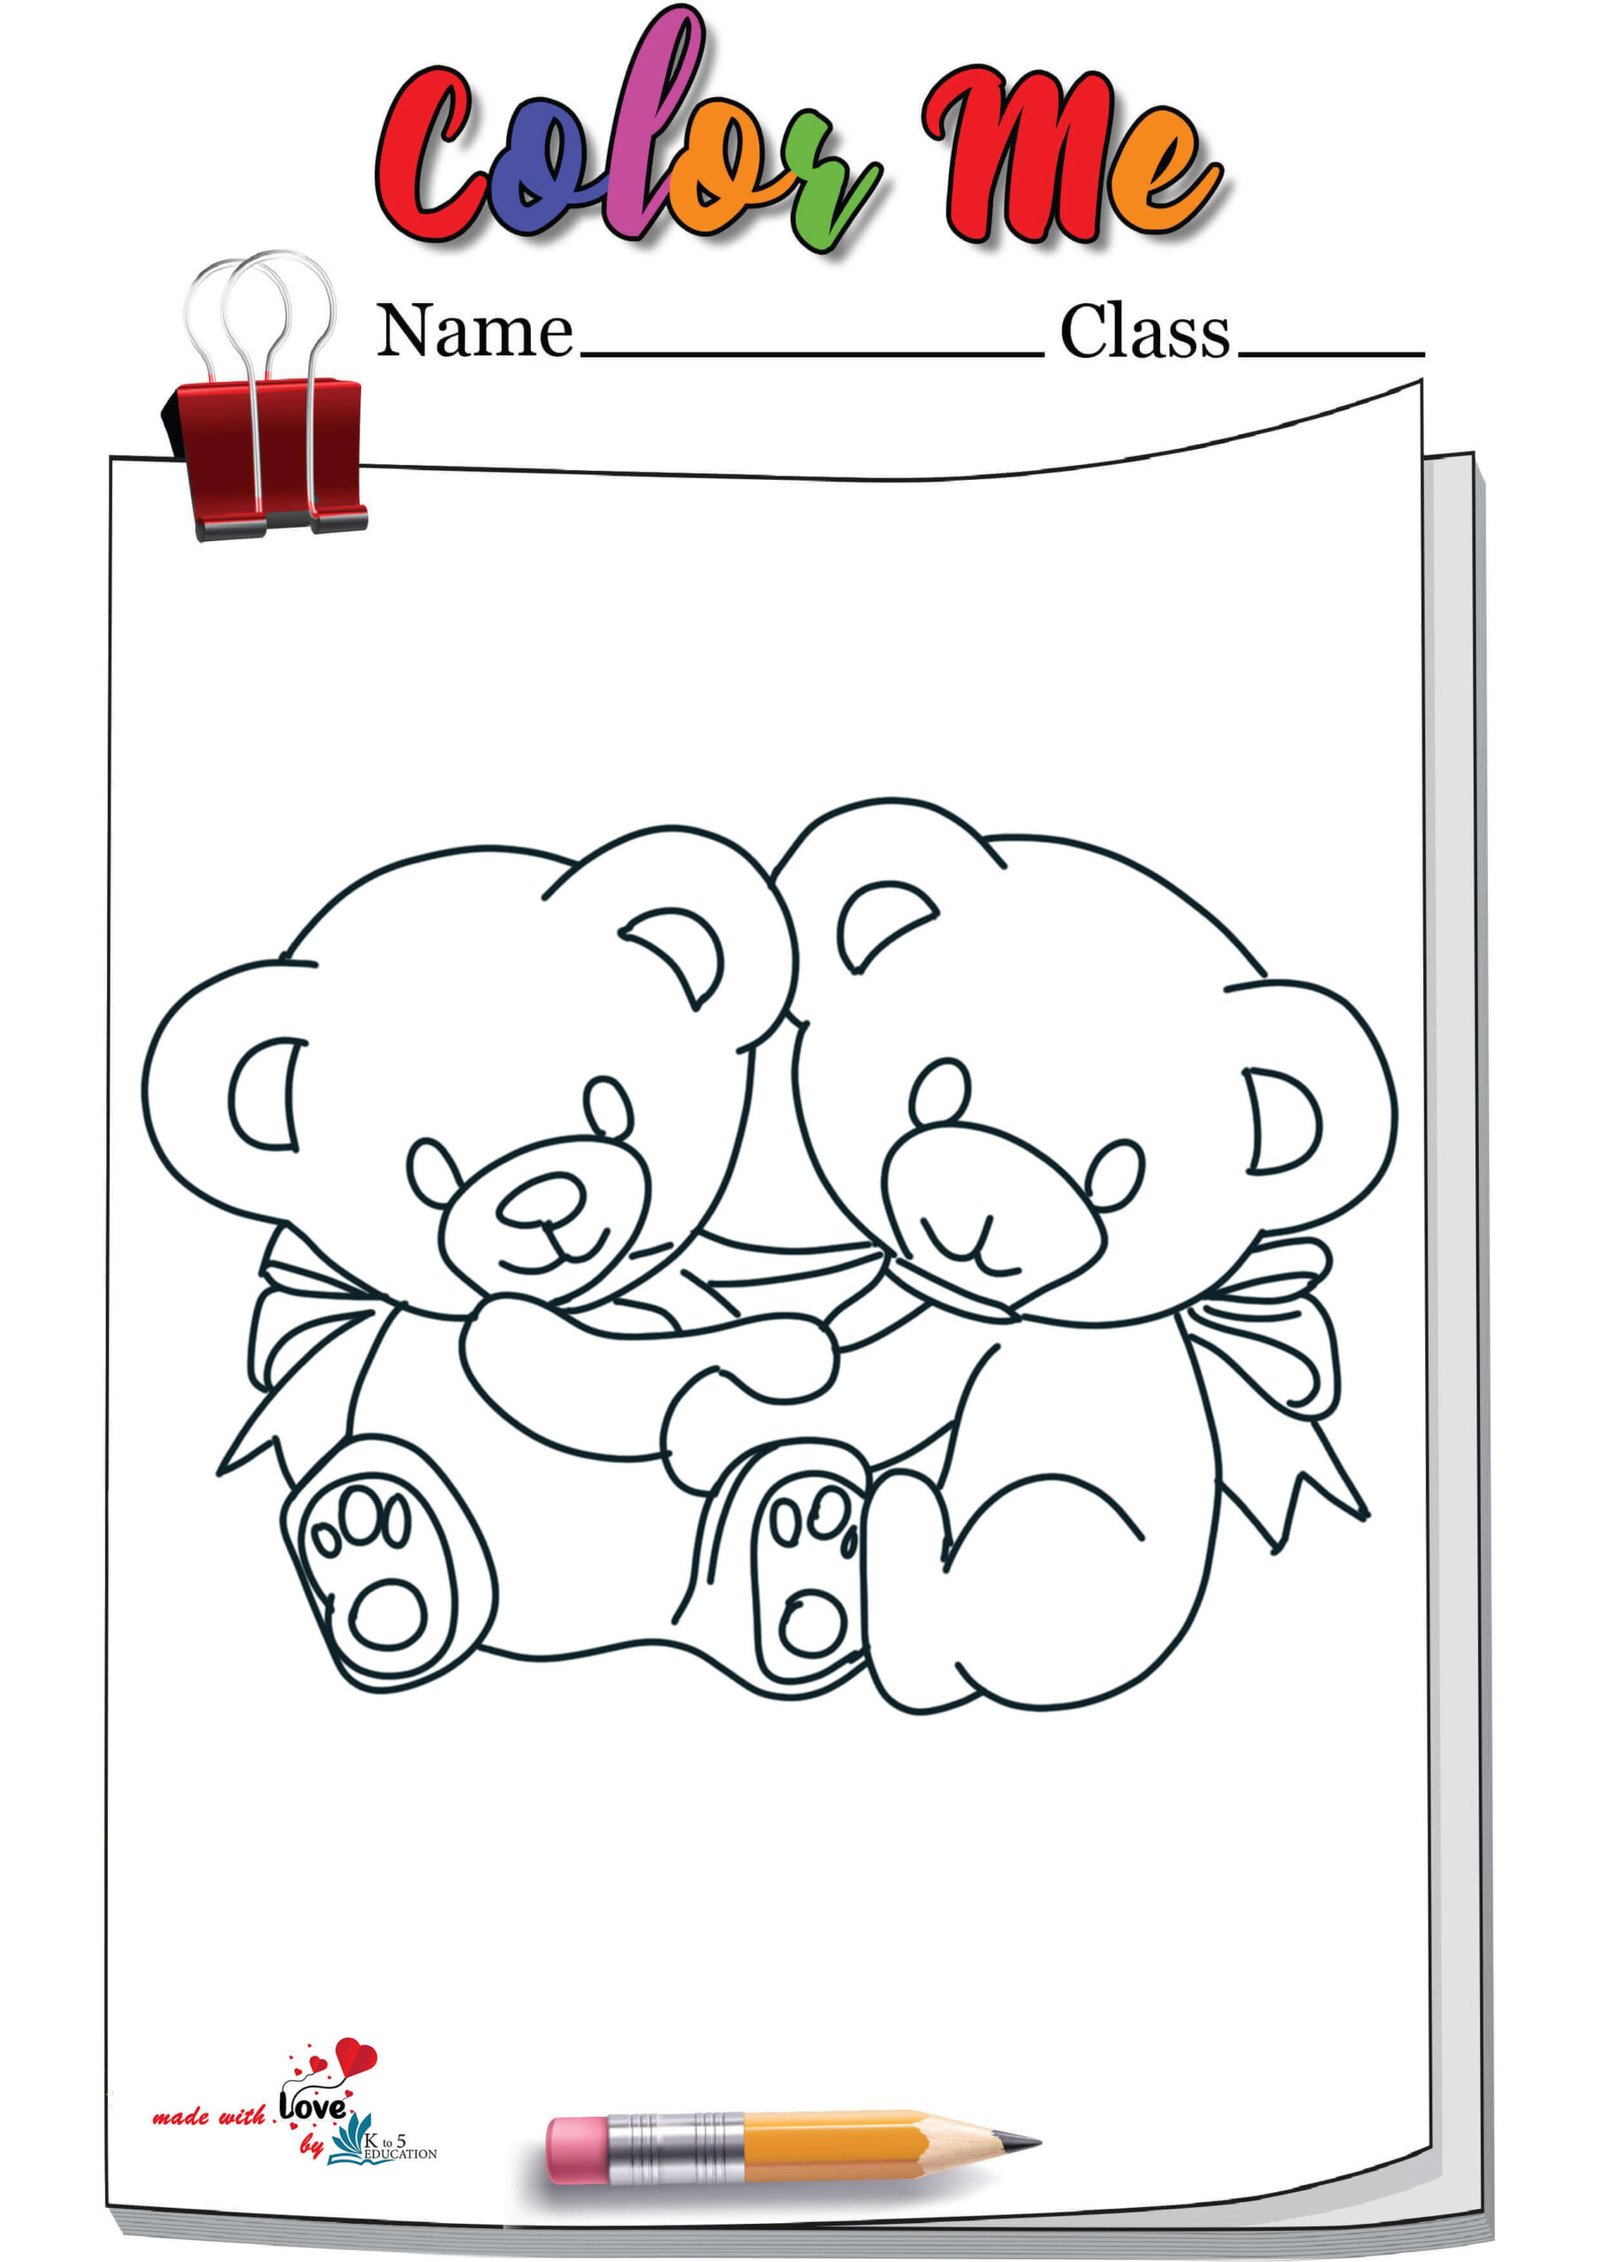 Teddy Bears Coloring Page